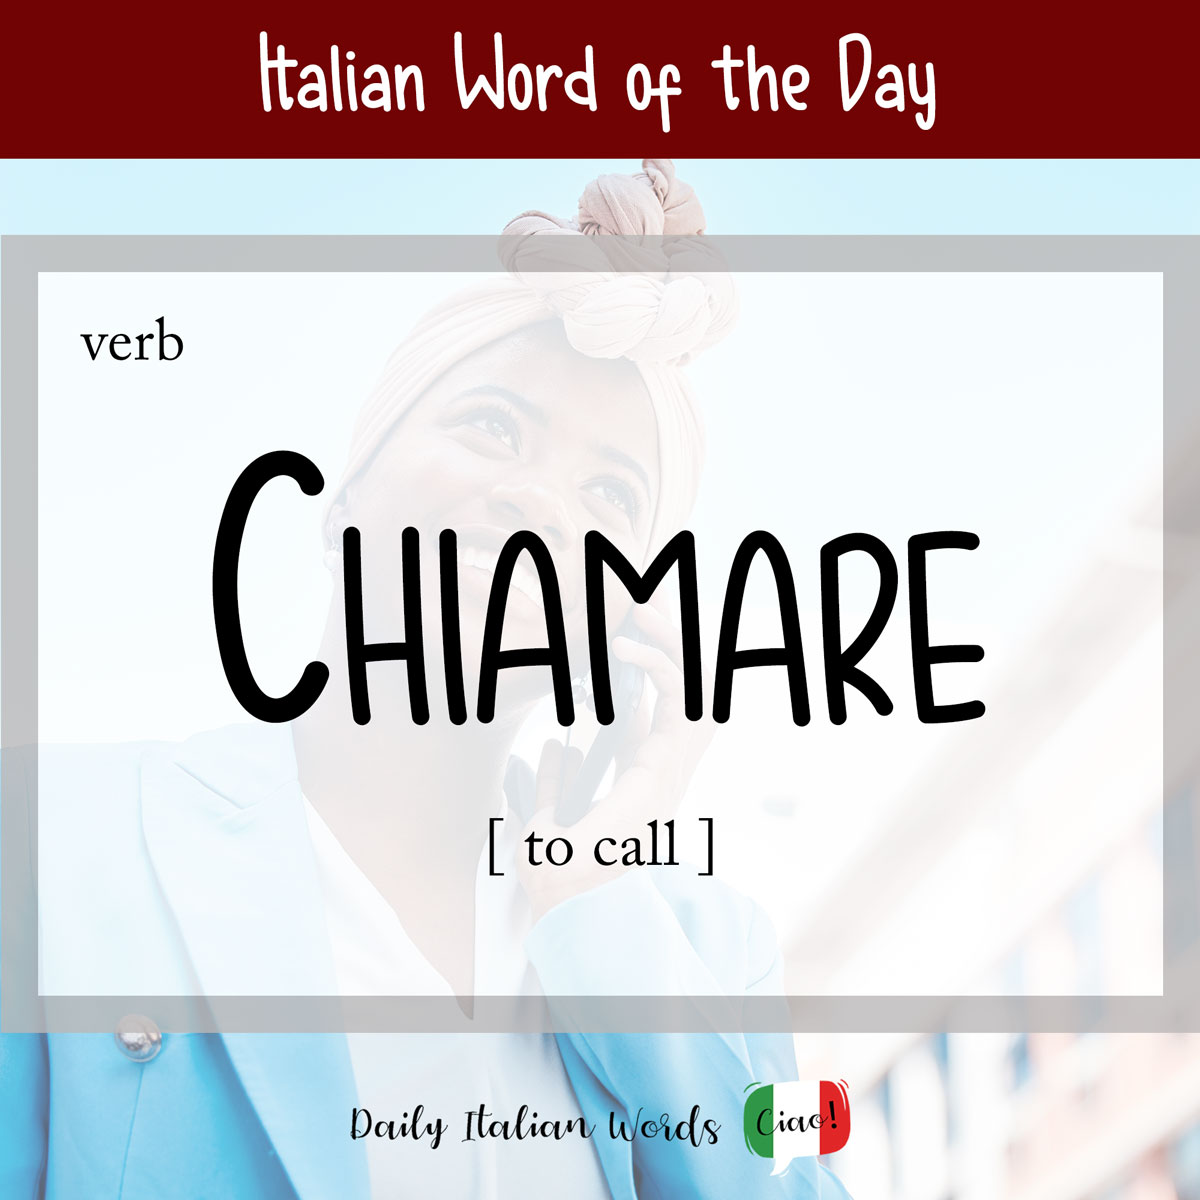 Italian word of the day: Chiamare (to call)